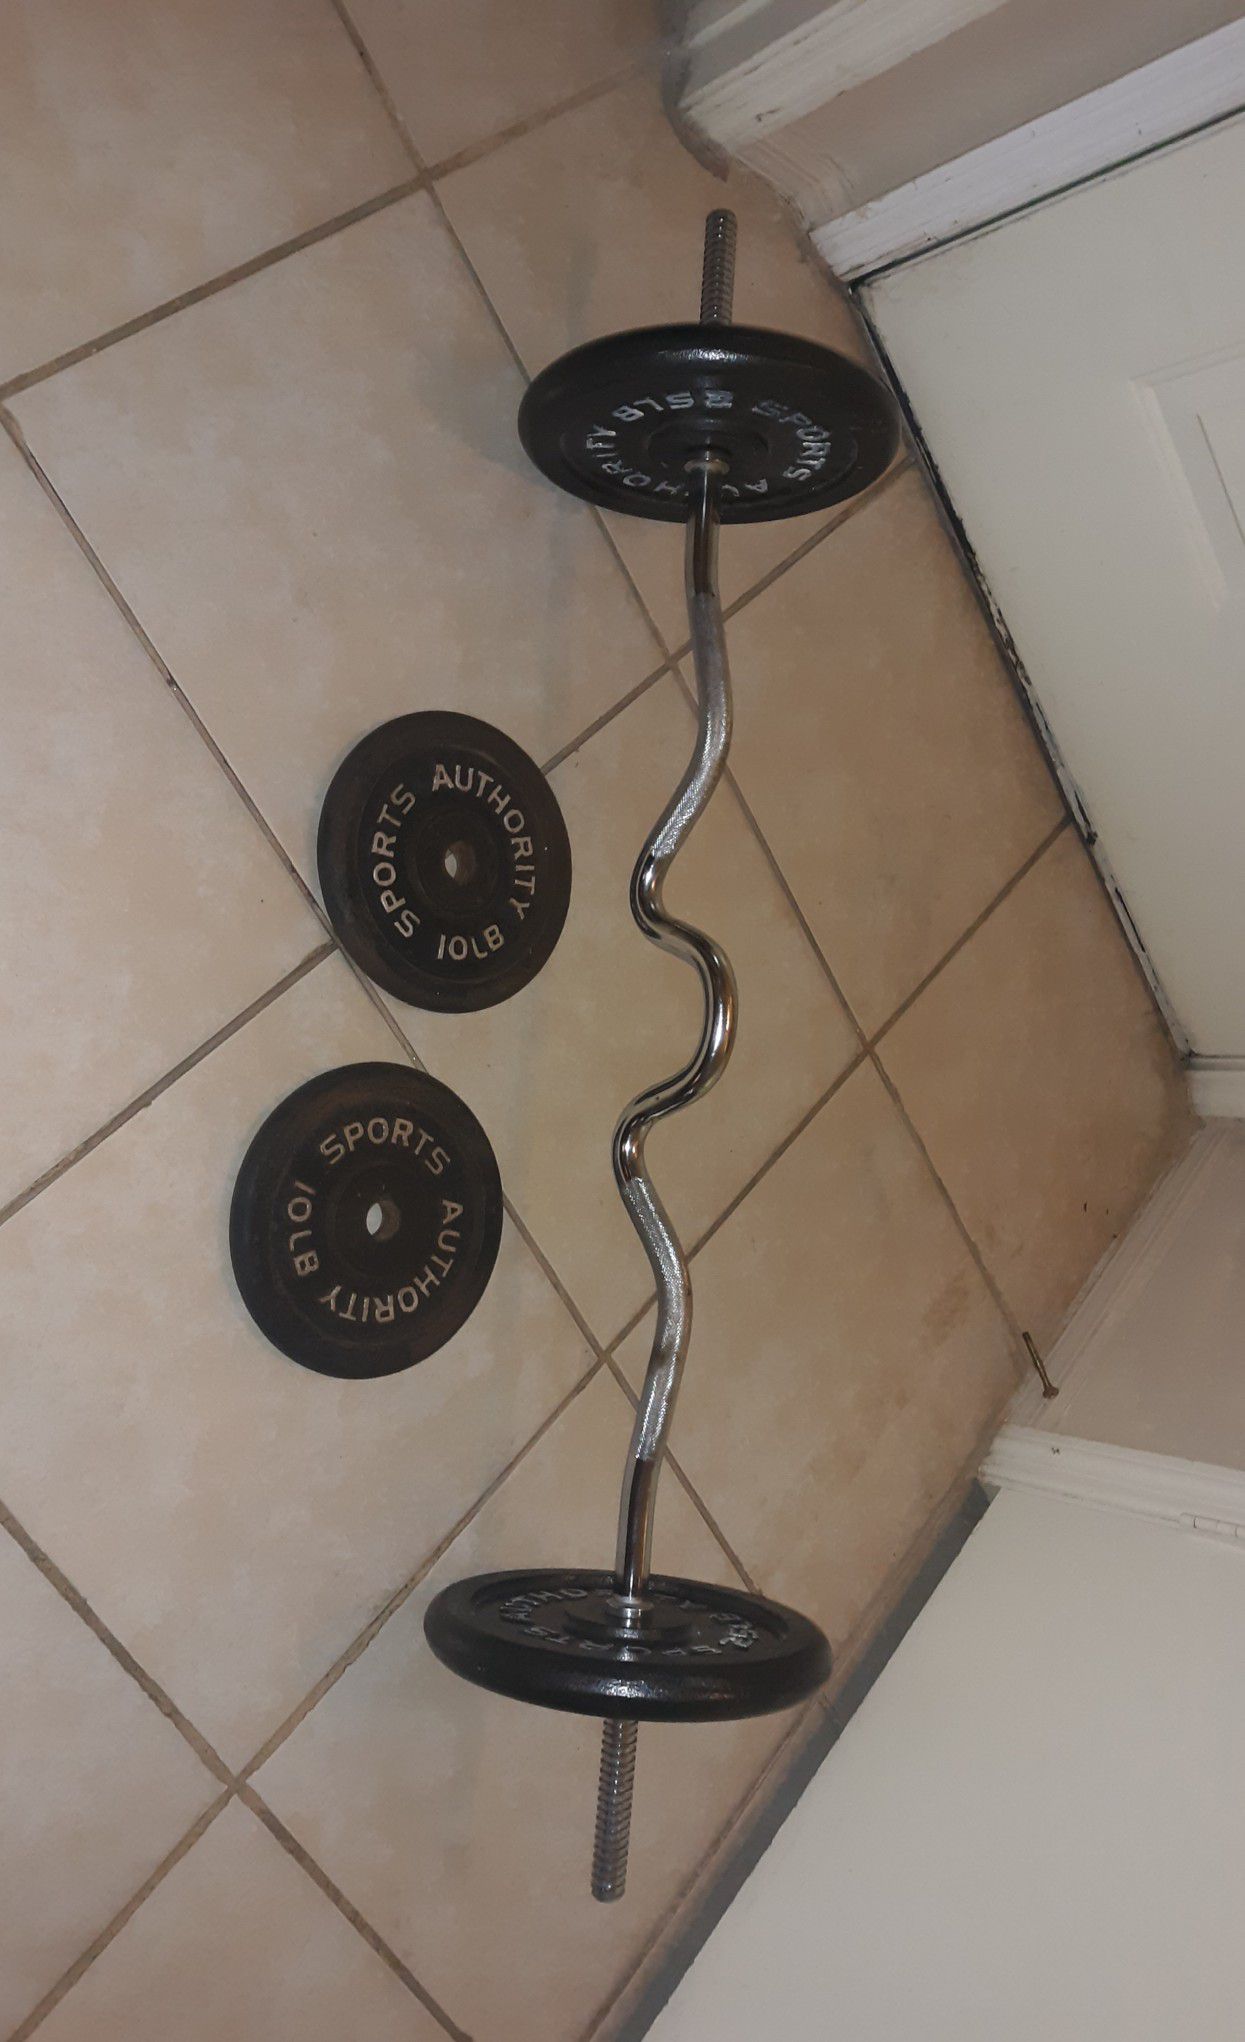 Sports Authority weights and Curl Bar